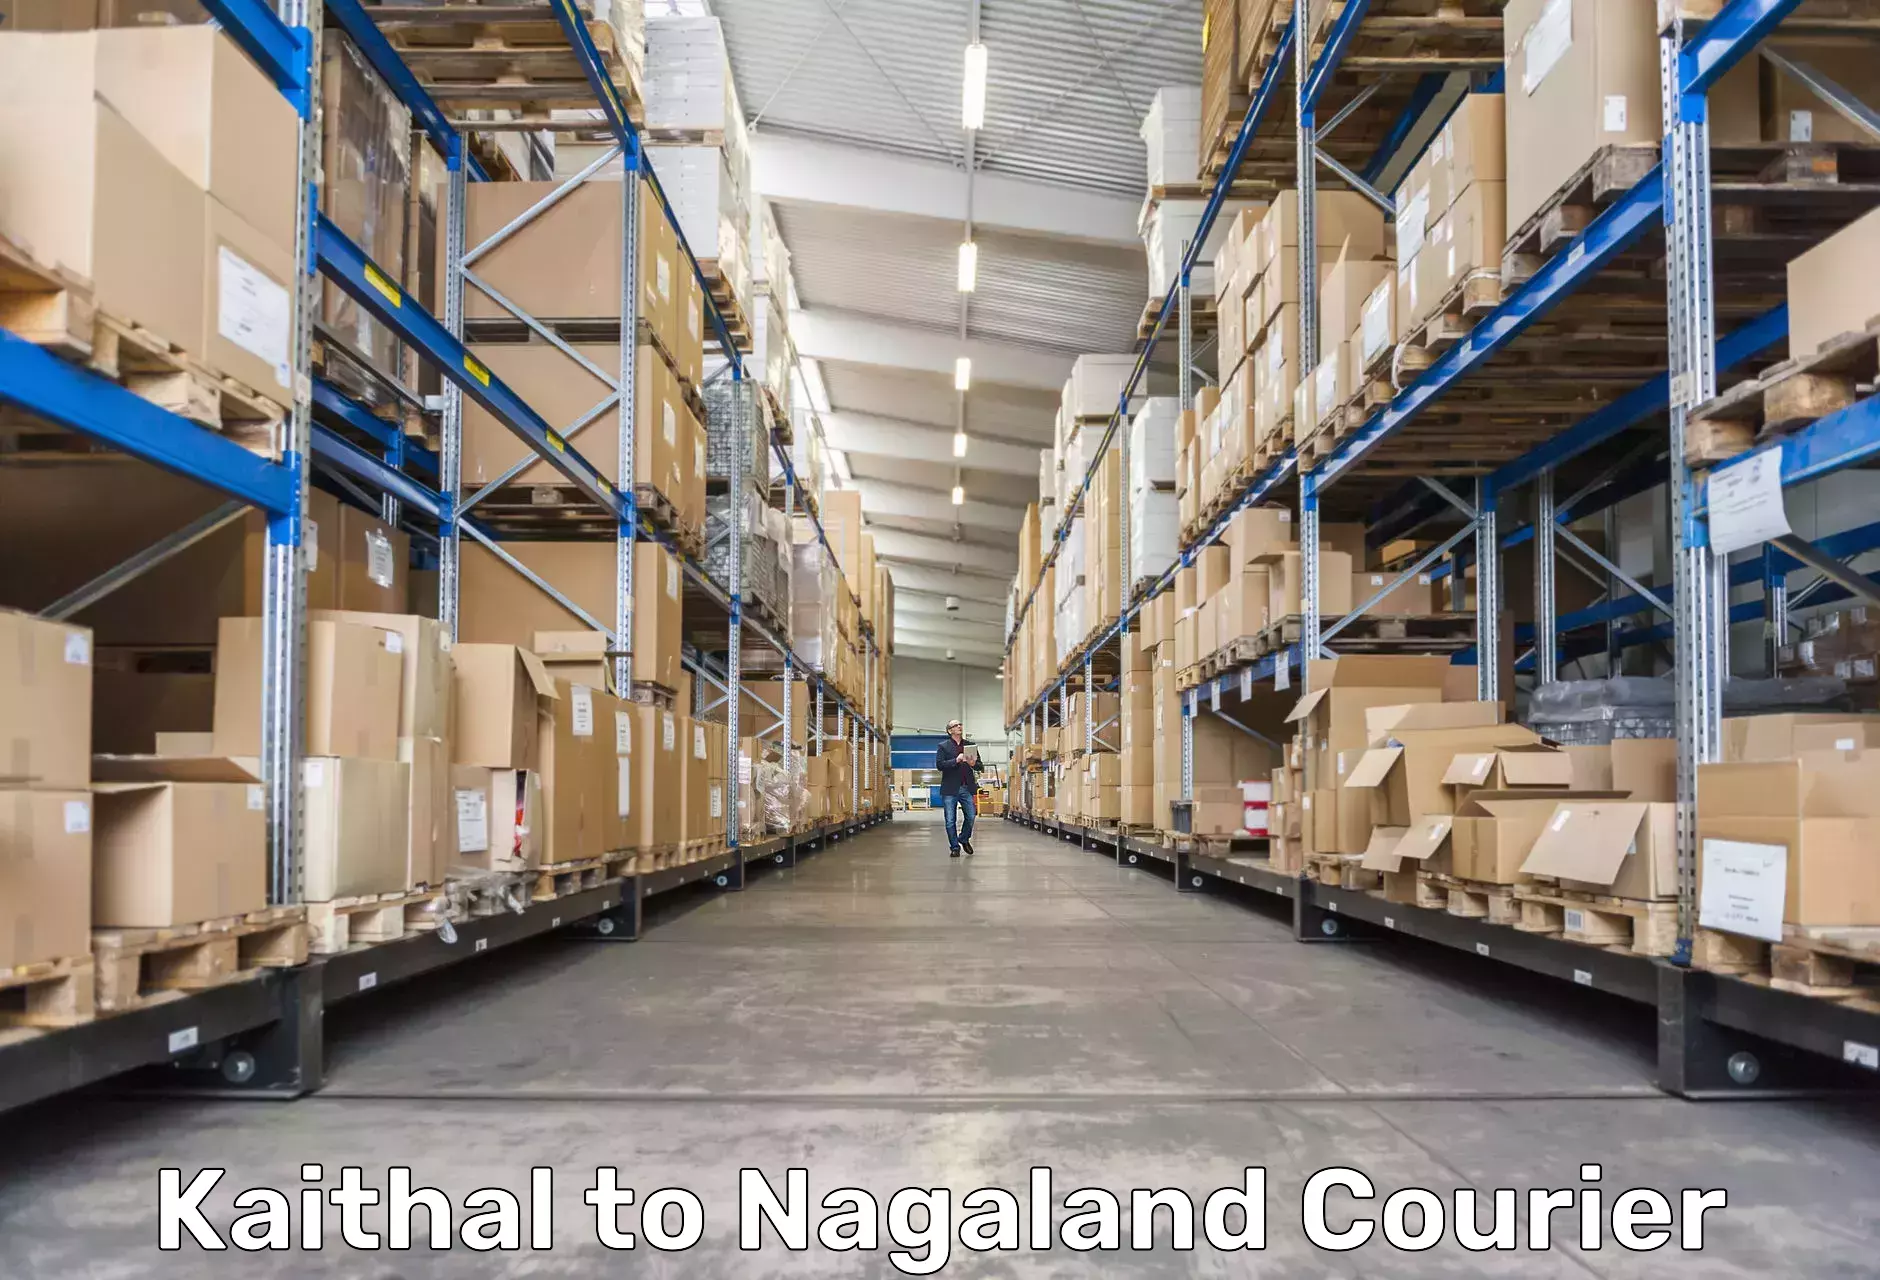 Flexible delivery schedules in Kaithal to Nagaland